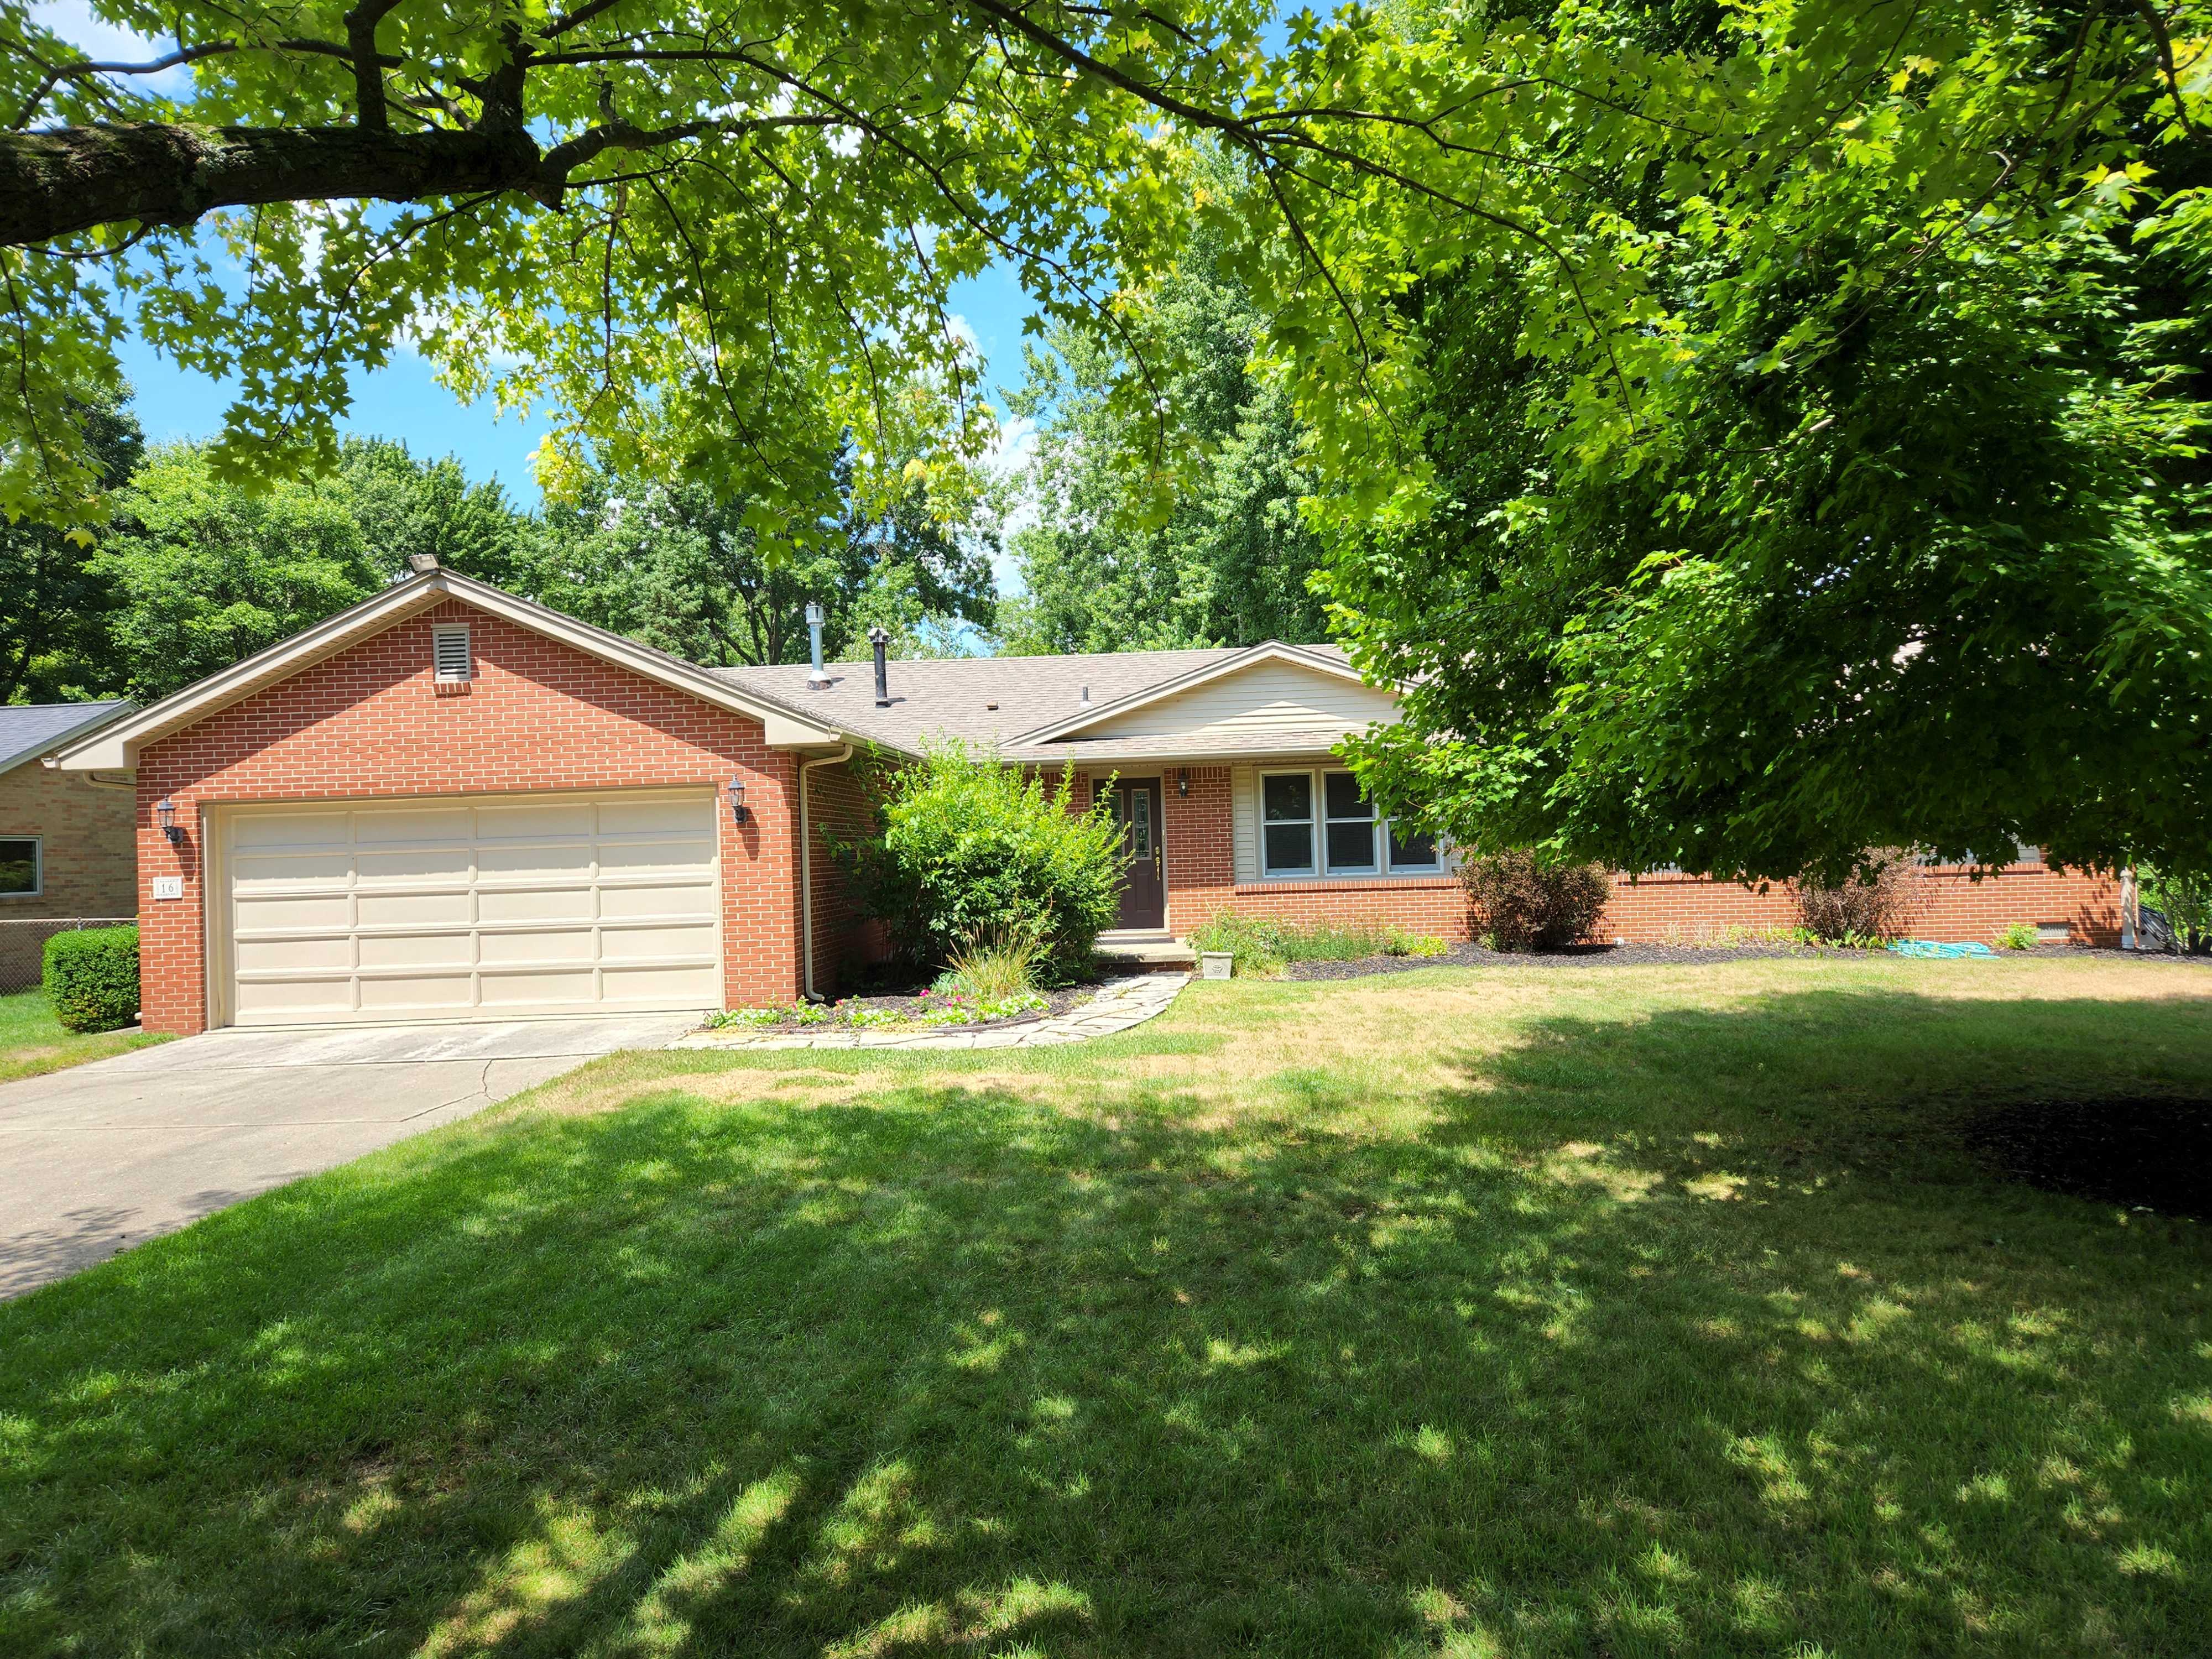 16 Tanglewood Ln., Bowling Green, OH  43402